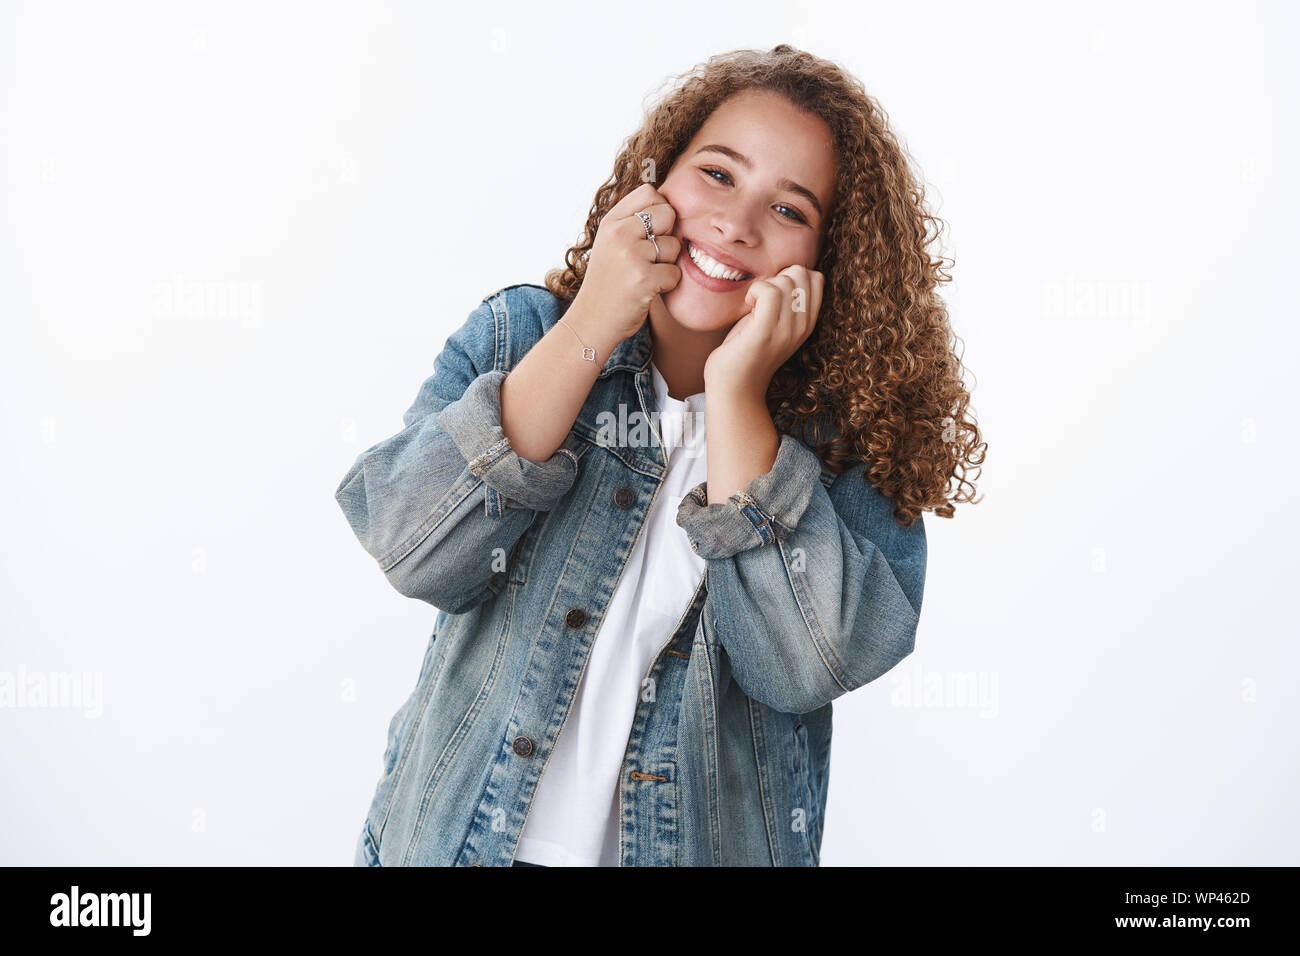 Happy charismatic tender silly chubby cute girl touching cheeks smiling cheerfully have best day enjoy life having fun doing good standing white backg Stock Photo